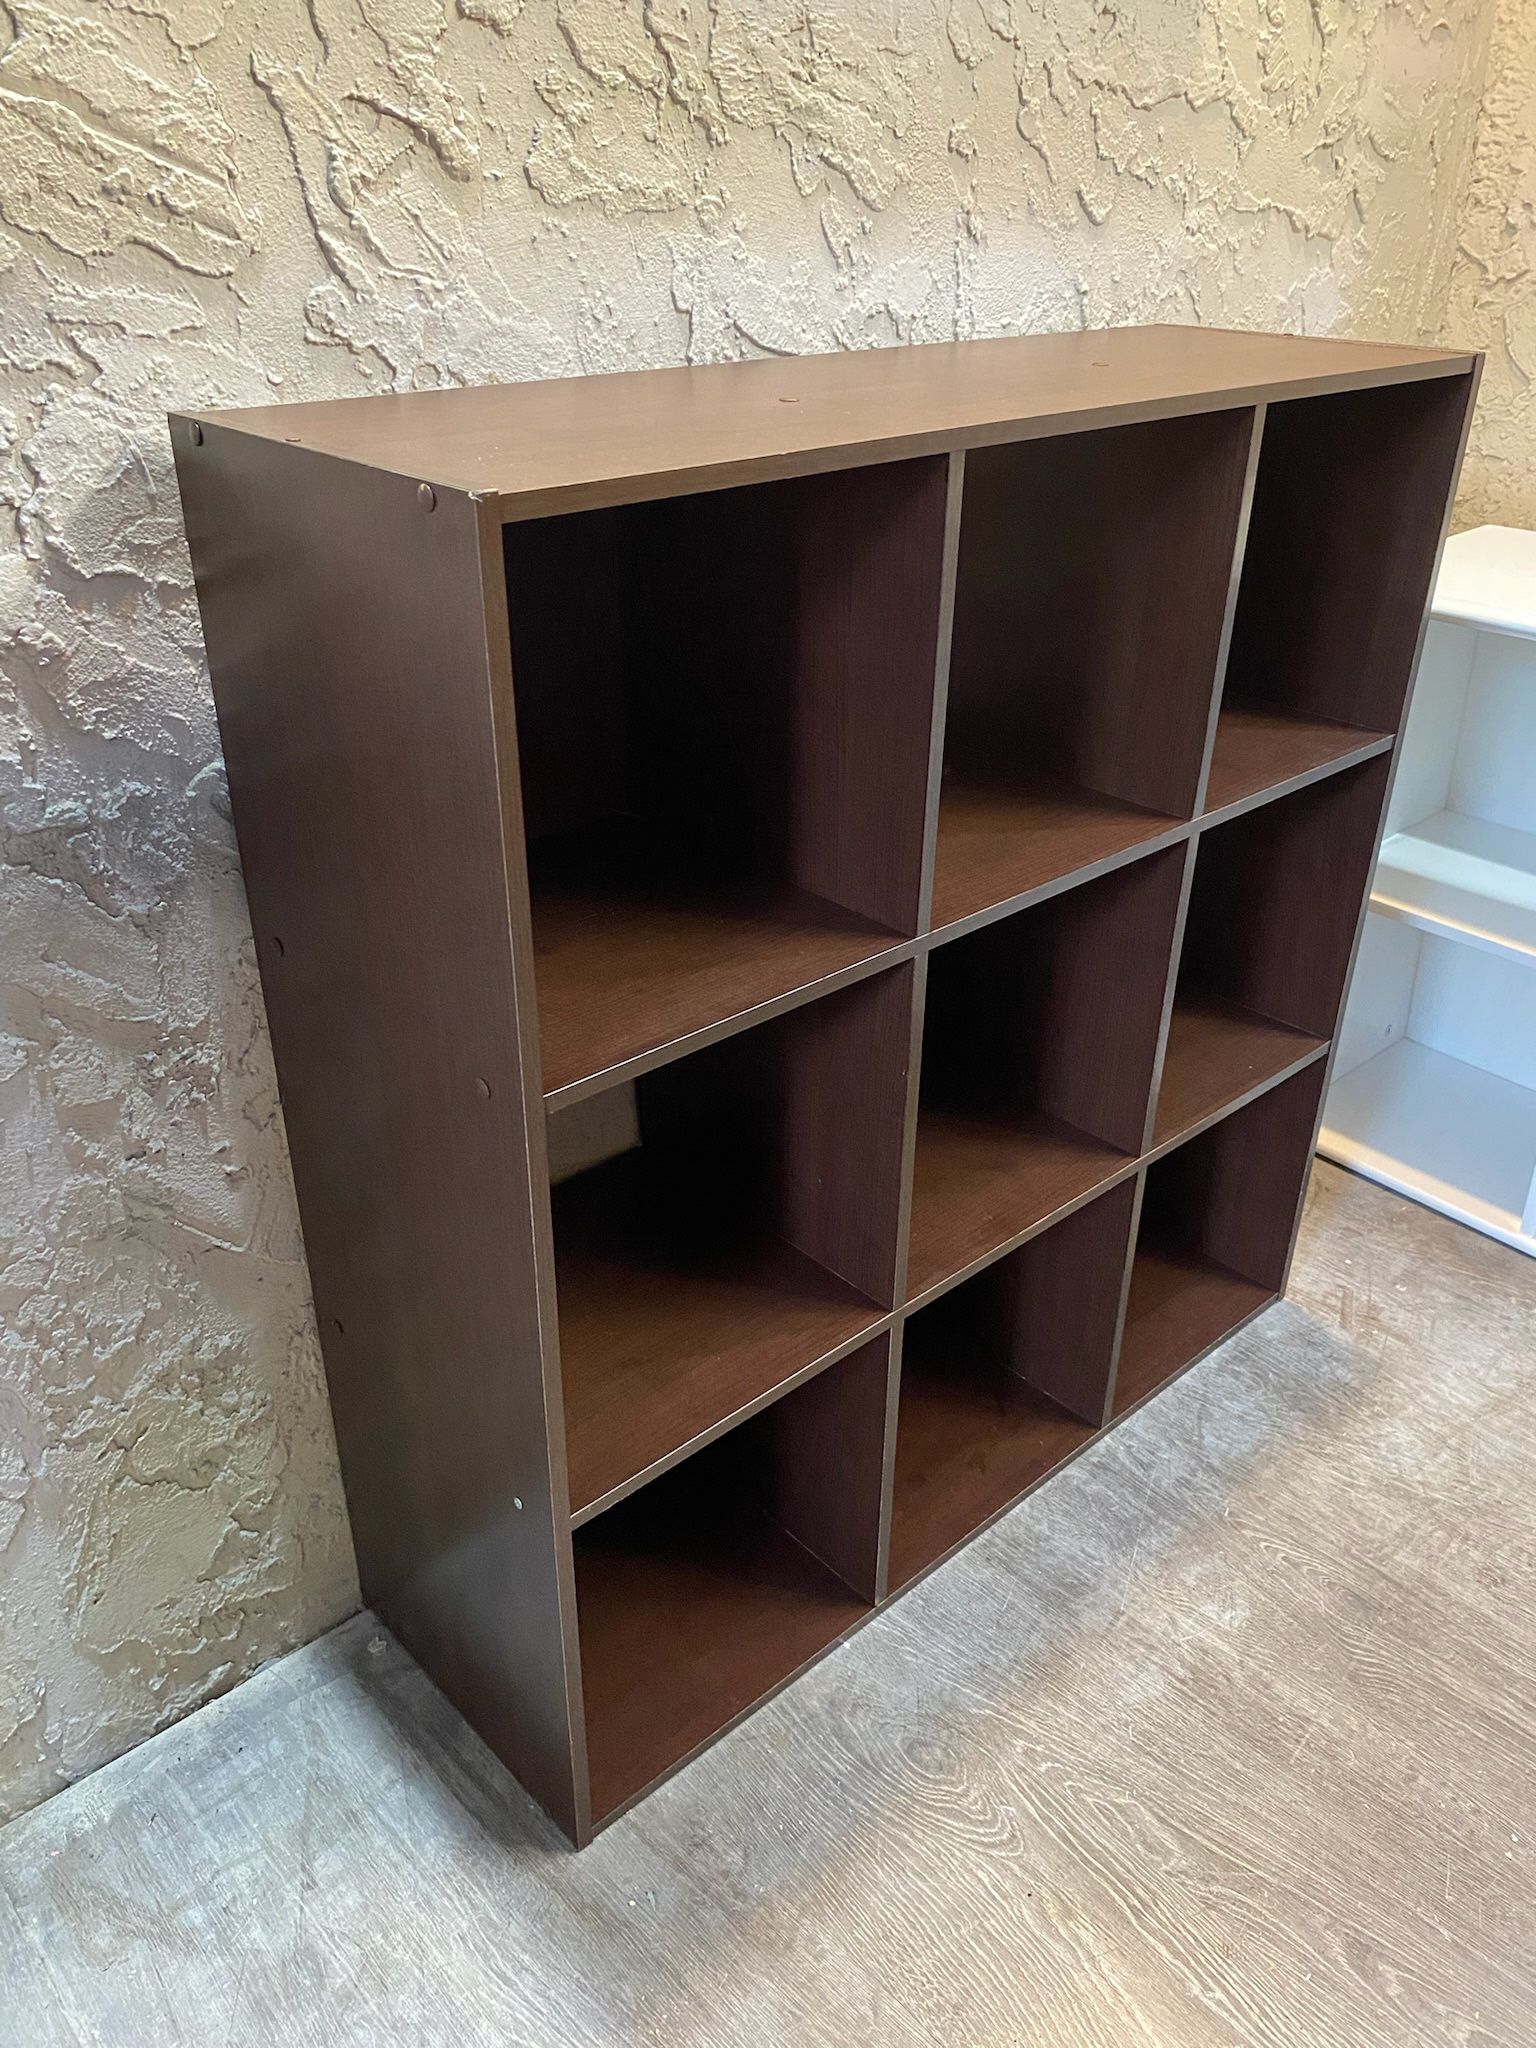 Brown Nine Cube Storage BookShelf Storage Organizer - Local Delivery for a Fee - See My Items 😃